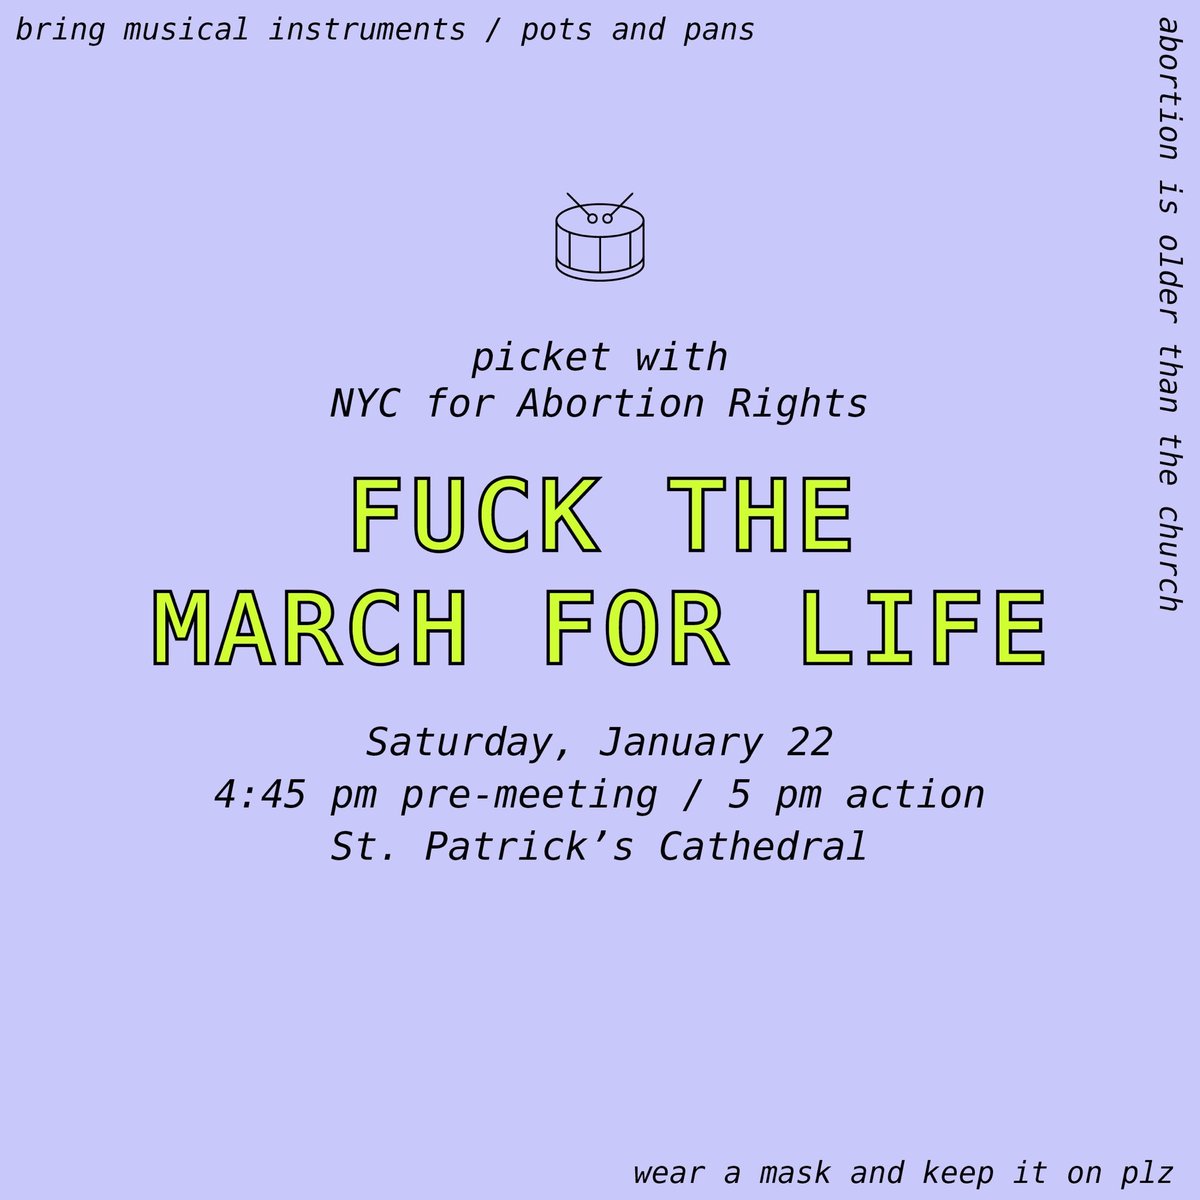 Flyer for a picket hosted by NYC for Abortion Rights on Saturday, January 22nd 2022 at St. Patrick's Cathedral in Midtown Manhattan. Pre-meeting at 4:45pm and action at 5pm. Bring musical instruments, pots/pans, and wear a mask please!